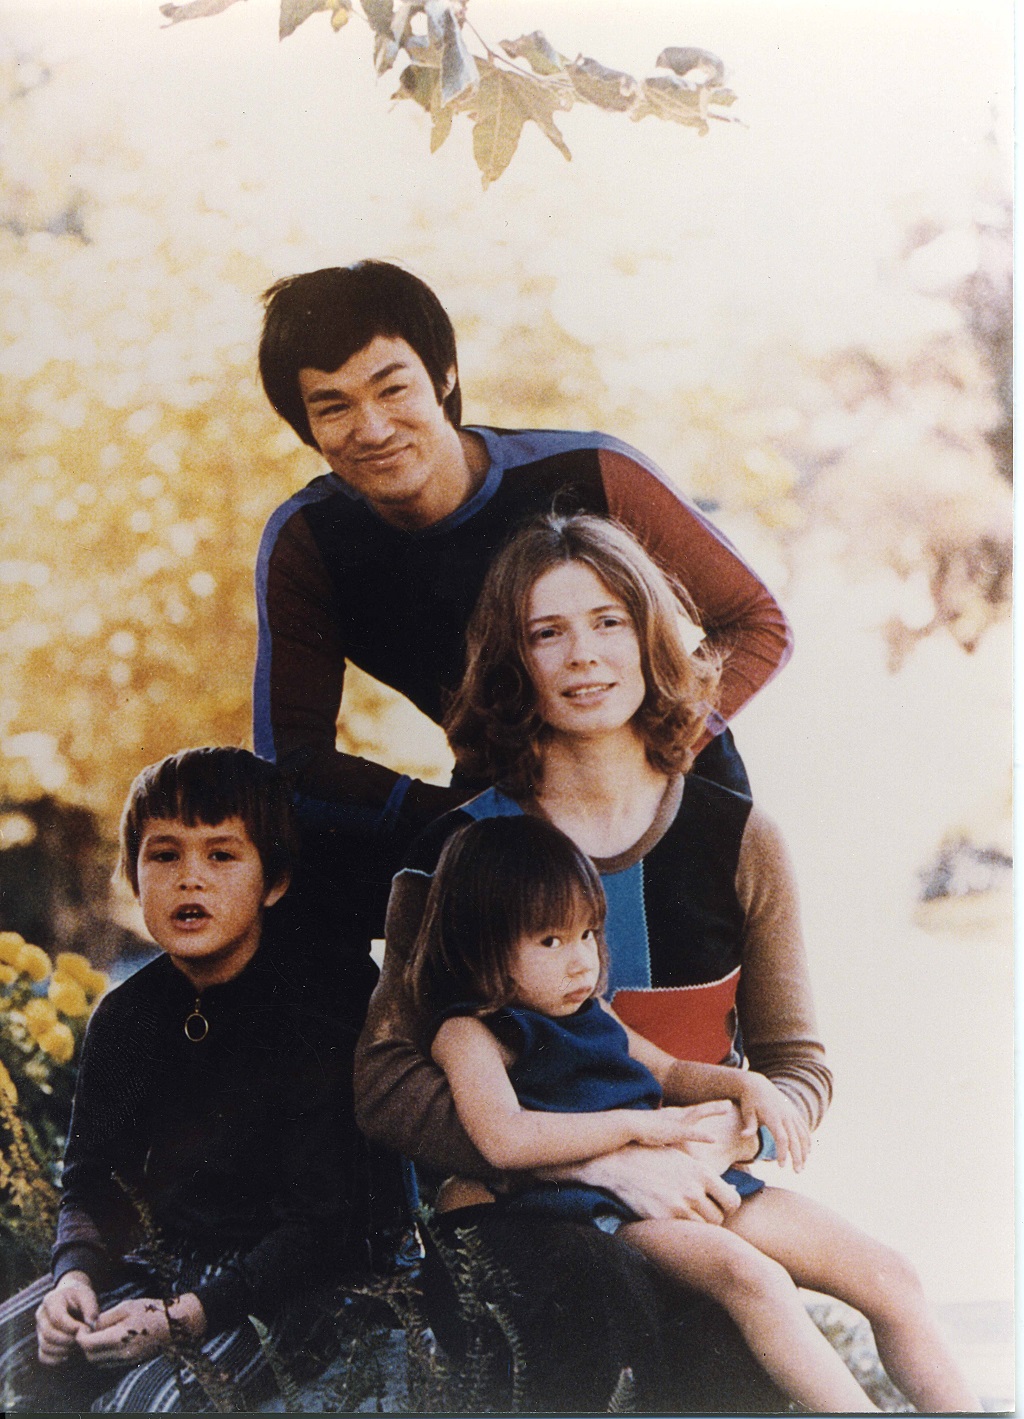 Bruce Lee with his wife Linda, son Brandon, and daughter Shannon